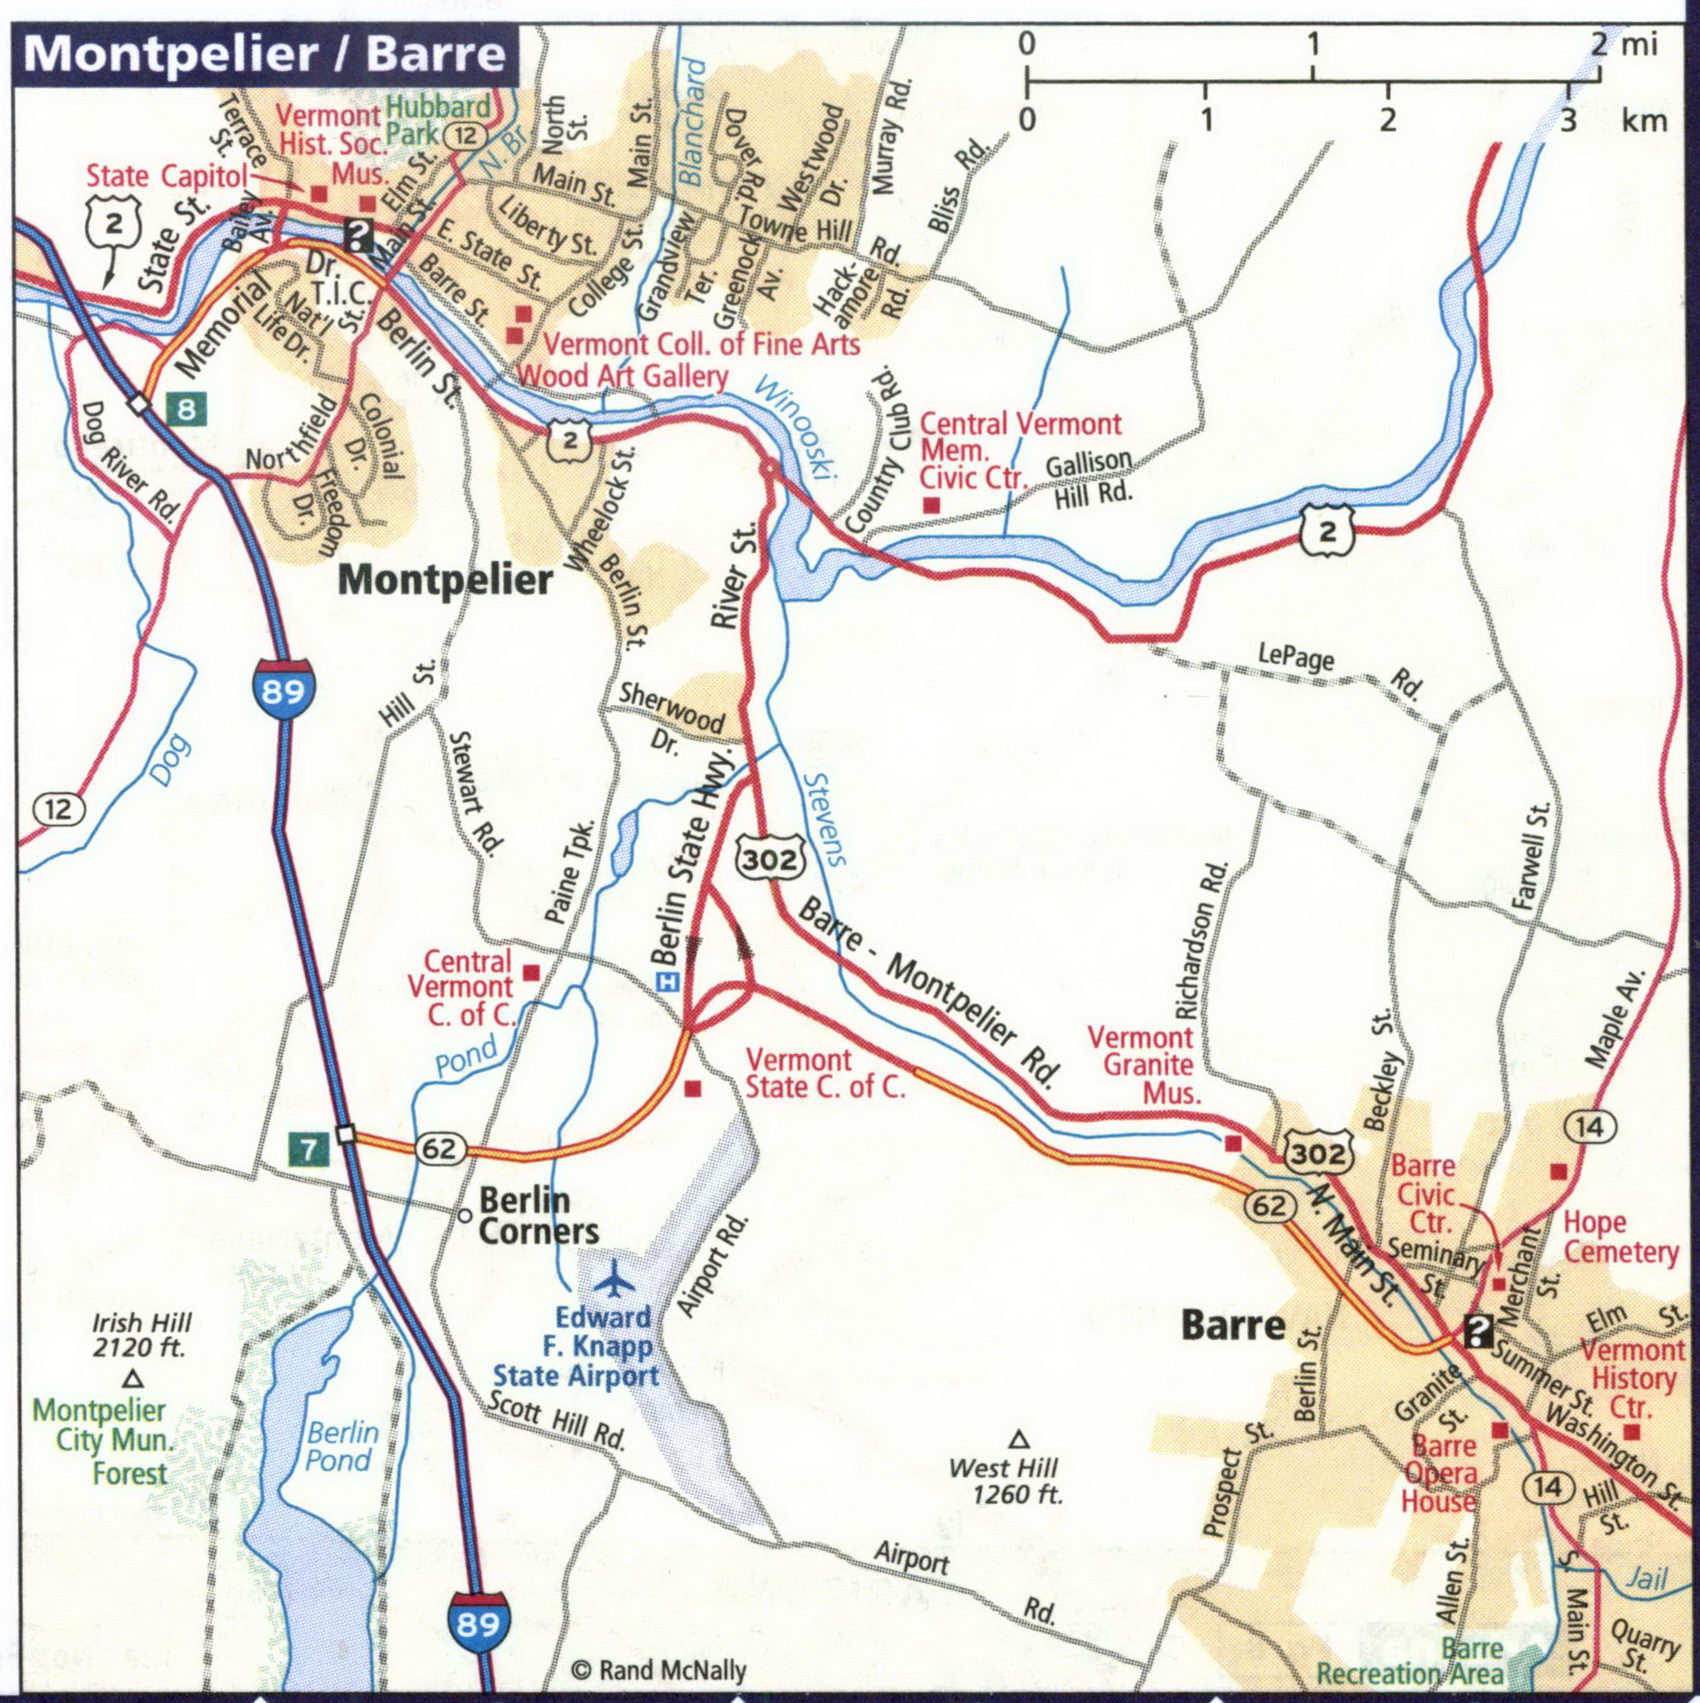 Map of Montpelier and Barre